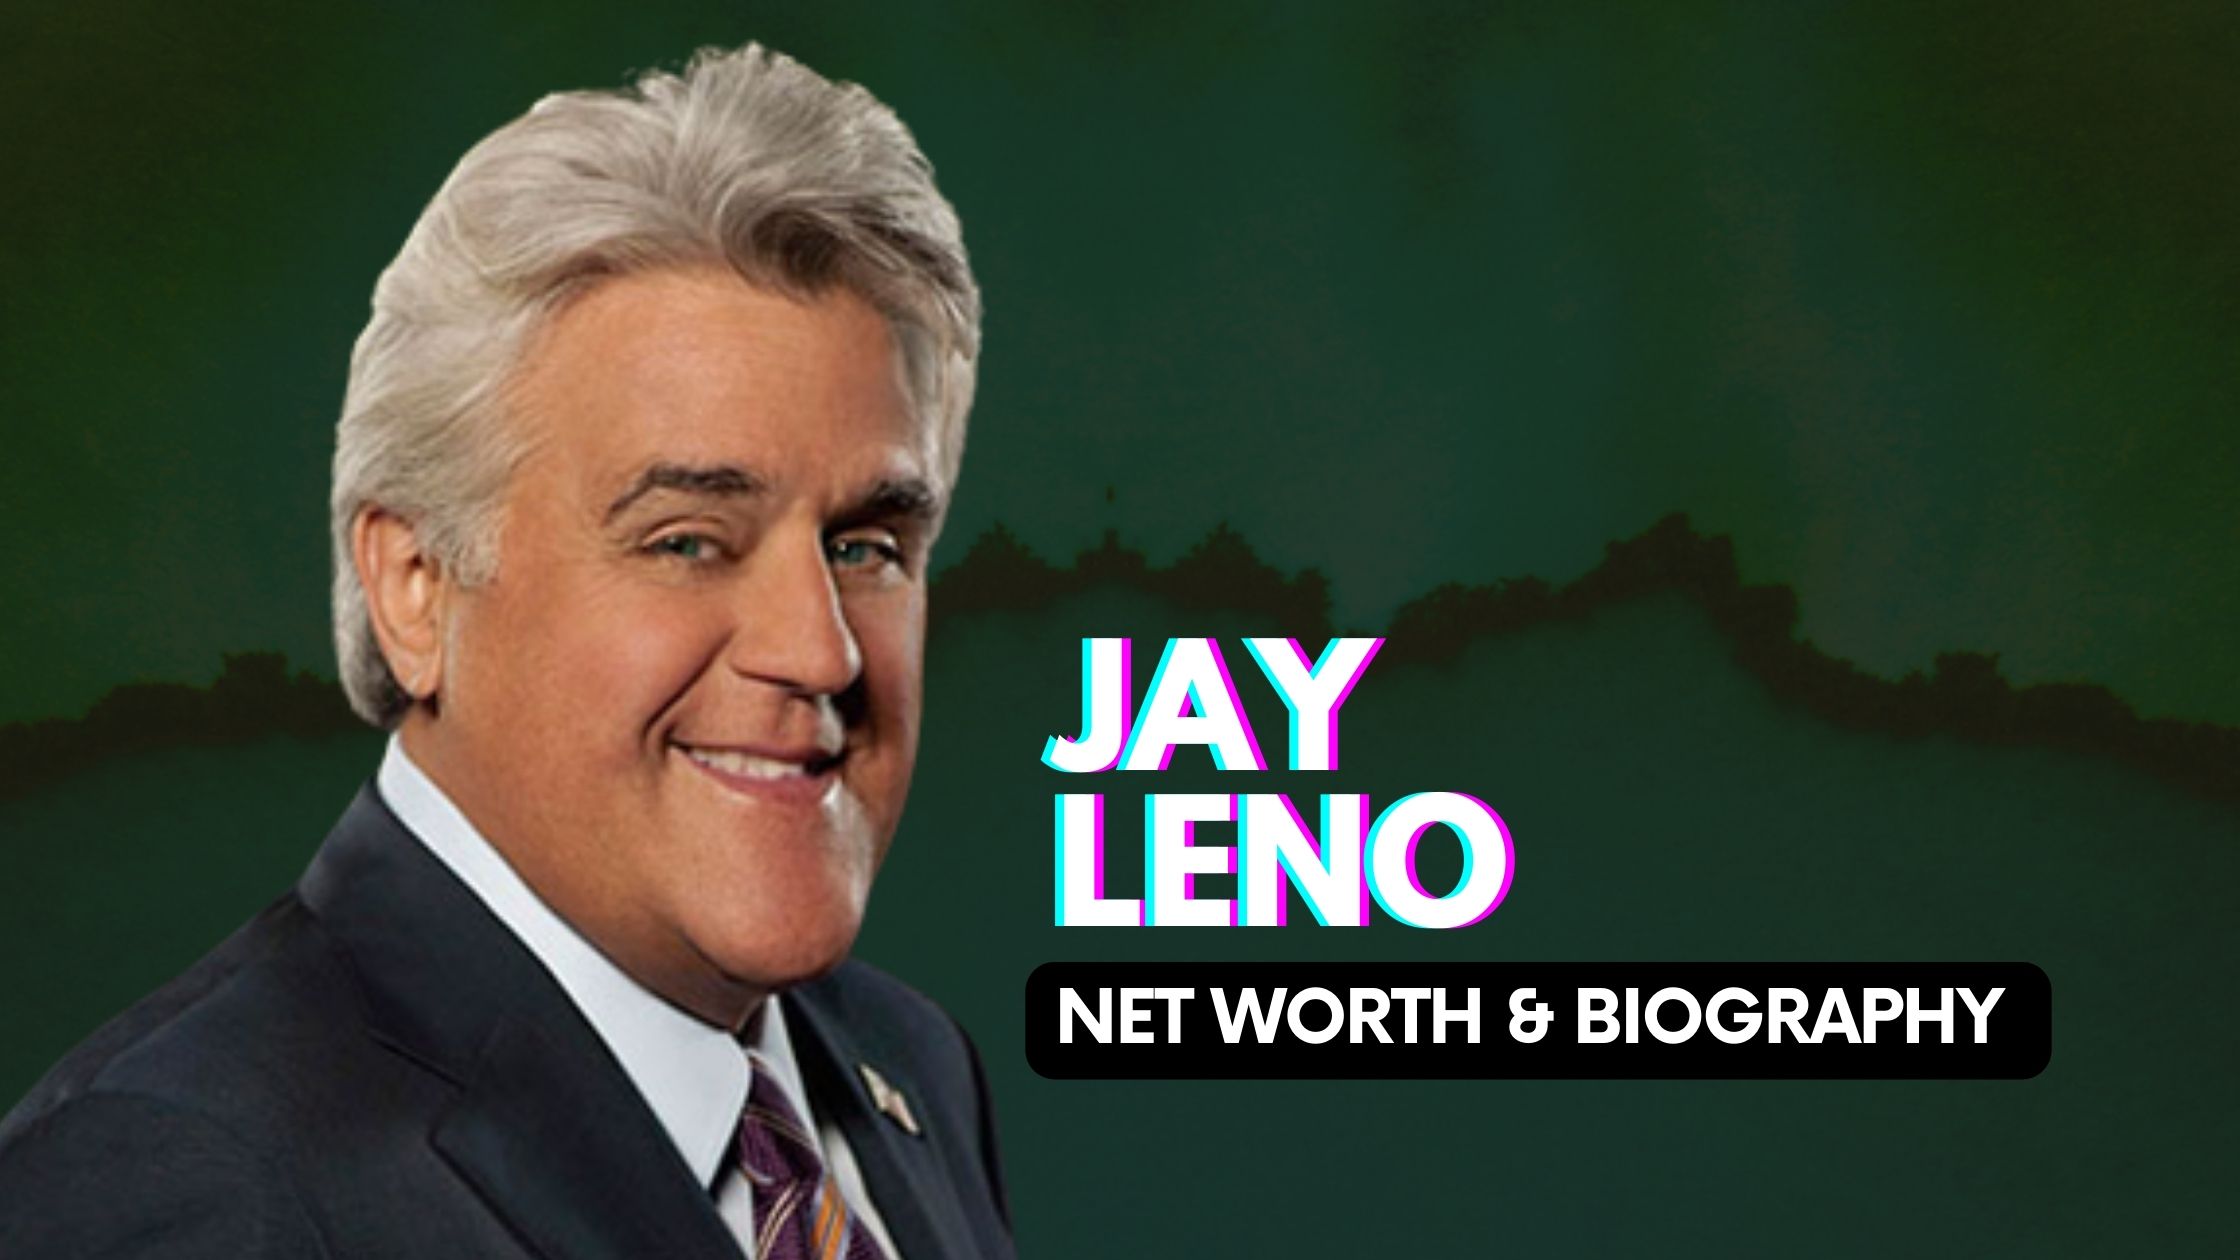 Jay Leno Net Worth And Biography